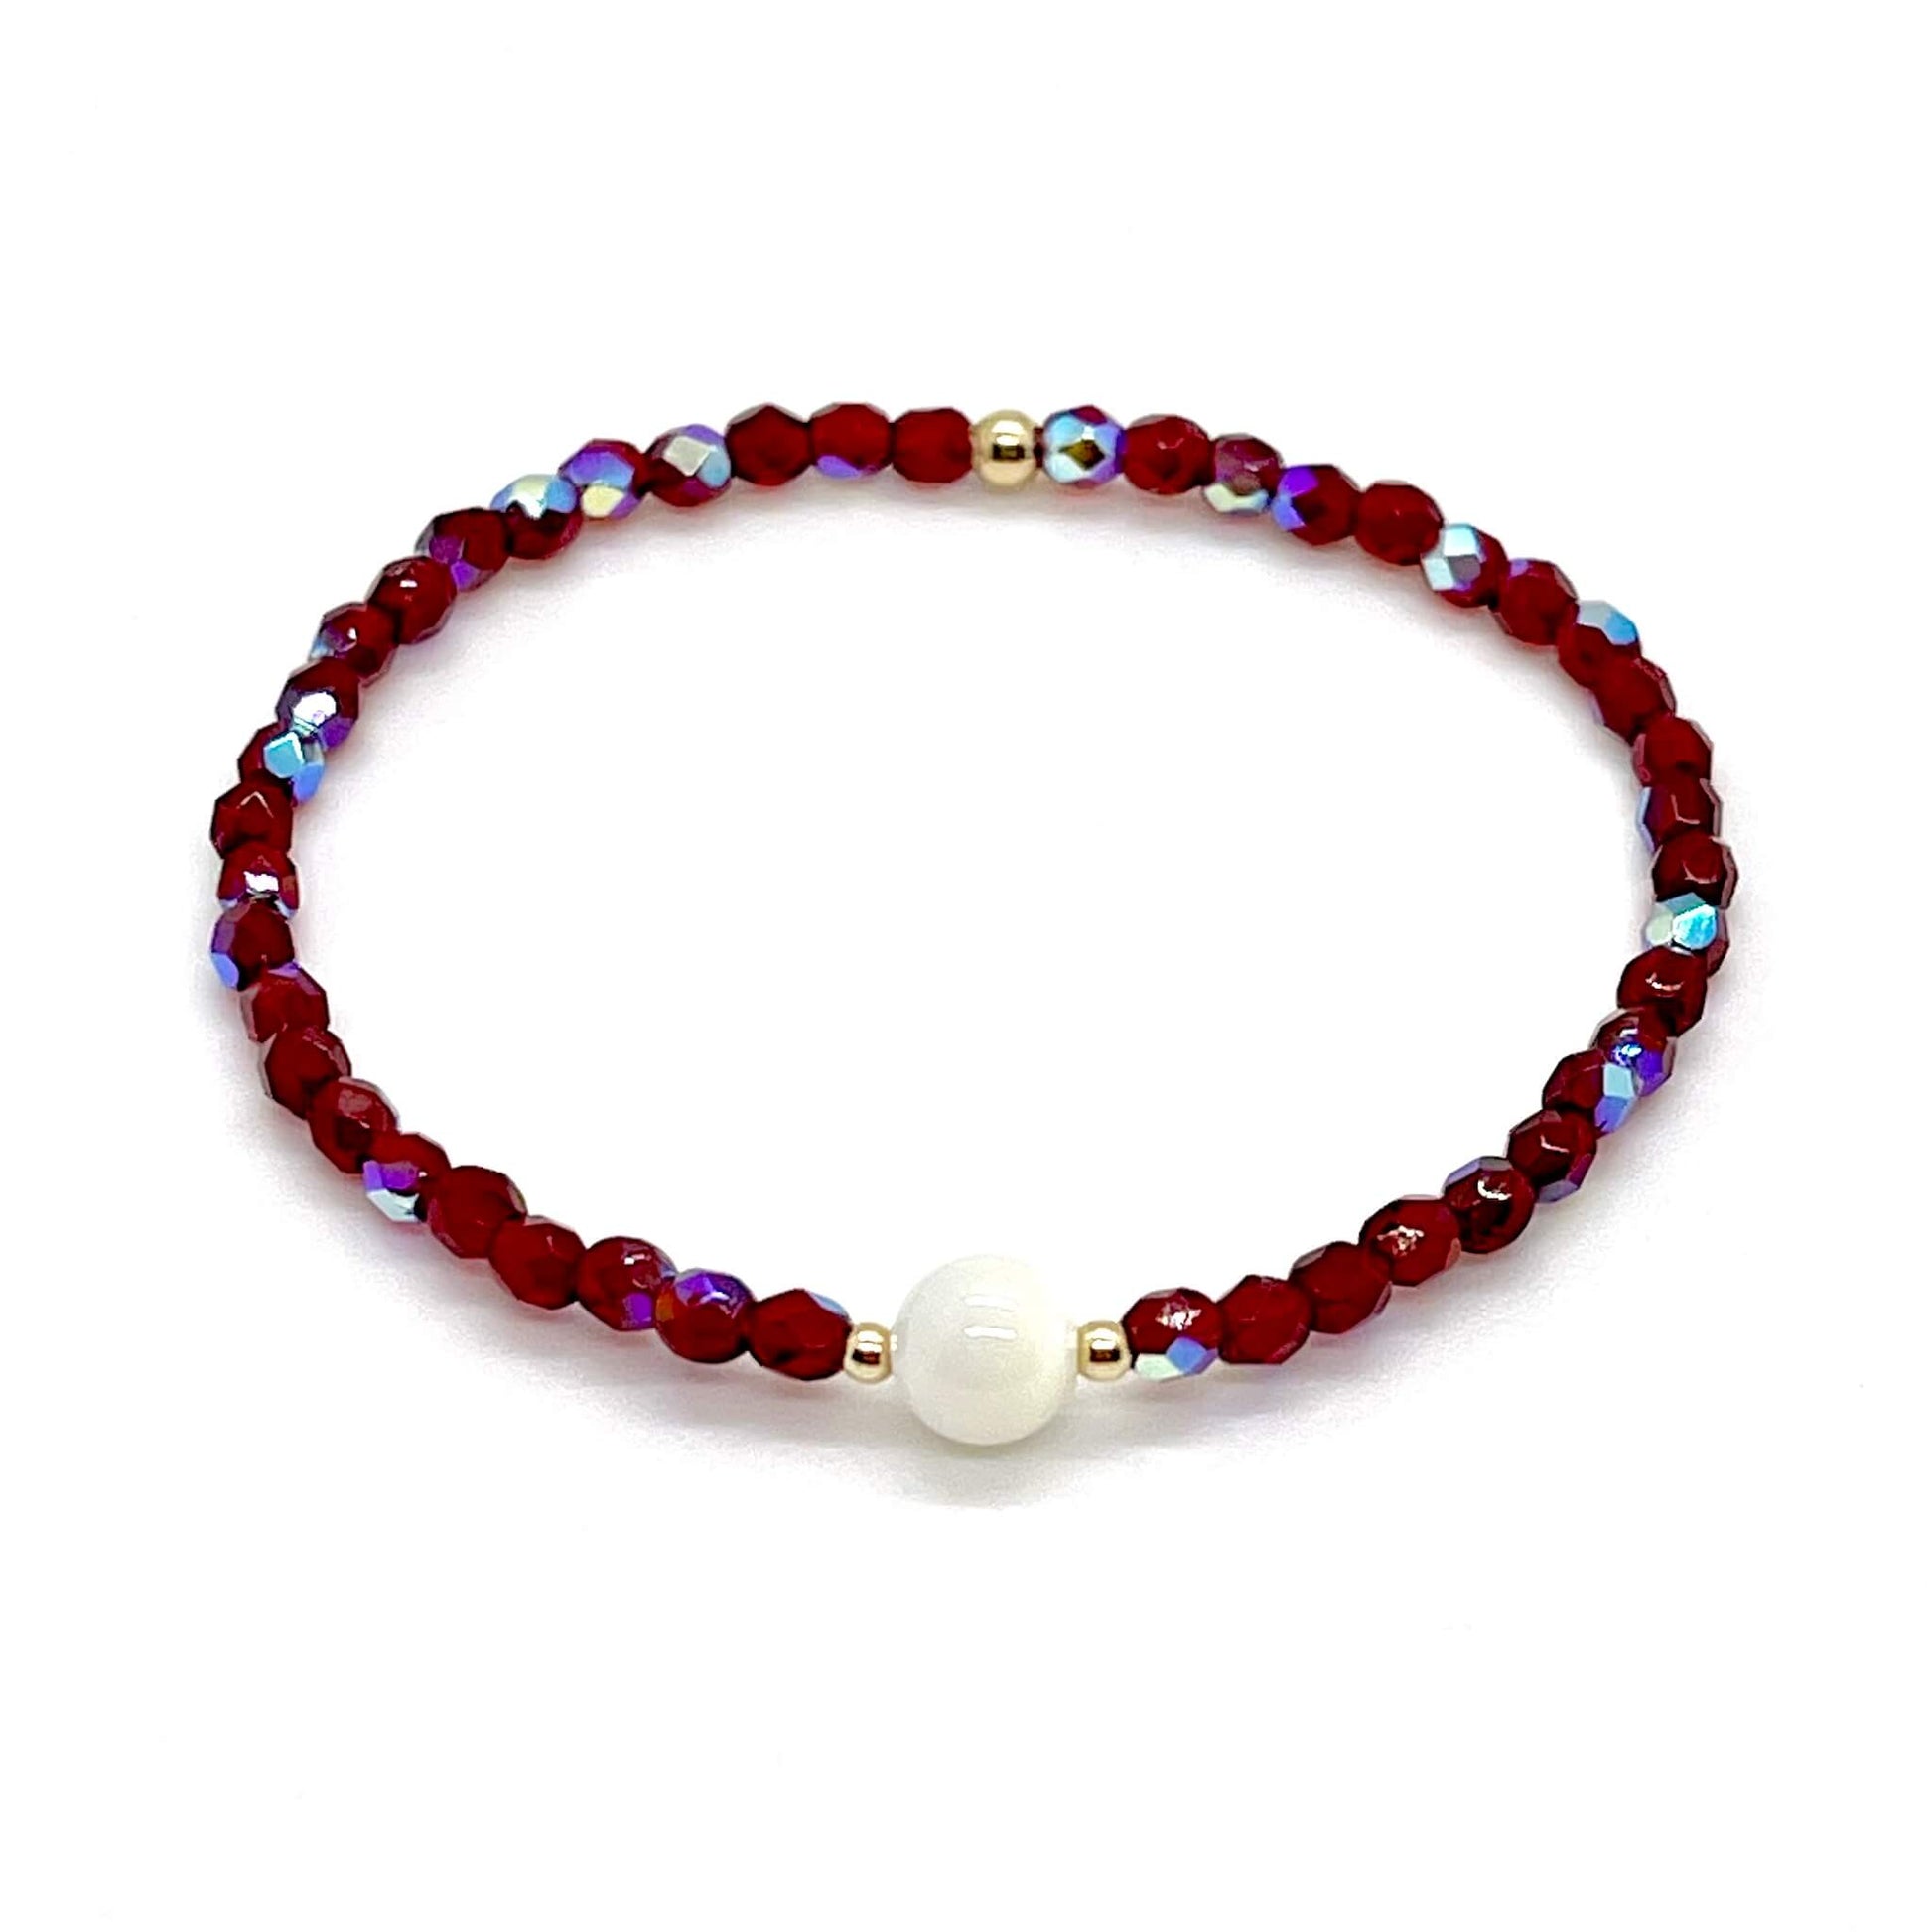 Red crystal bracelet with a mother-of-pearl center bead and small gold accent beads.